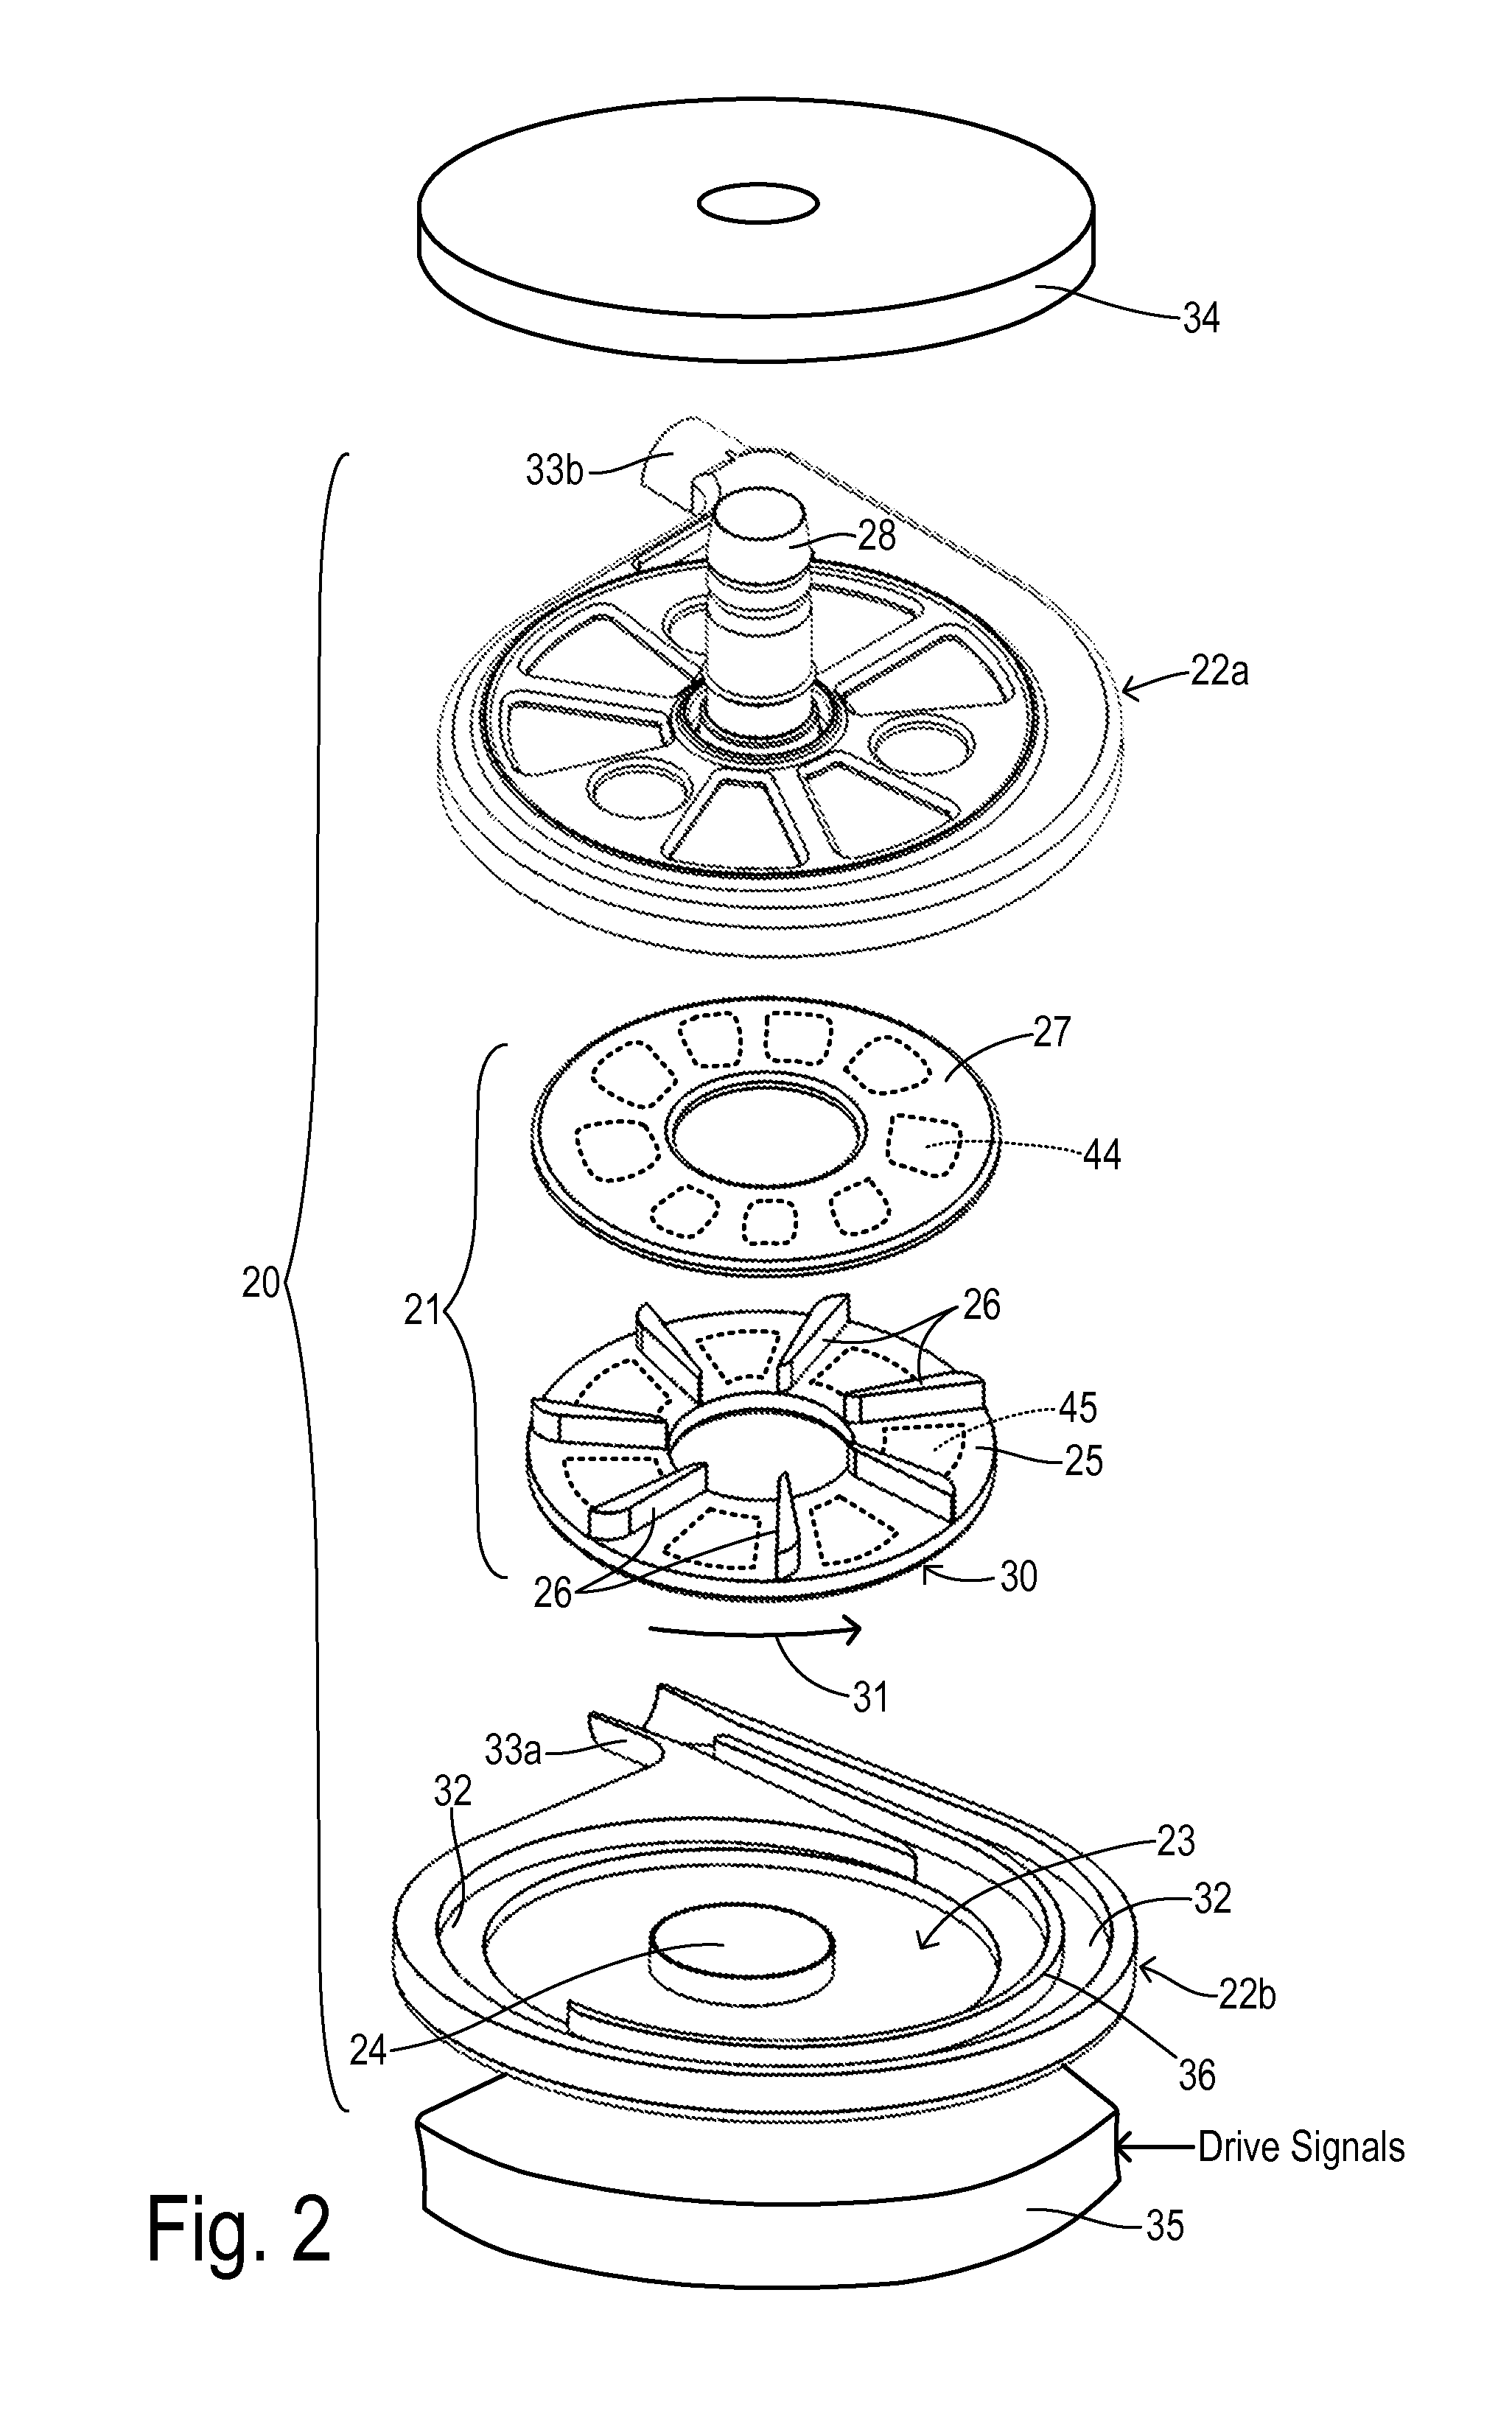 Startup sequence for centrifugal pump with levitated impeller